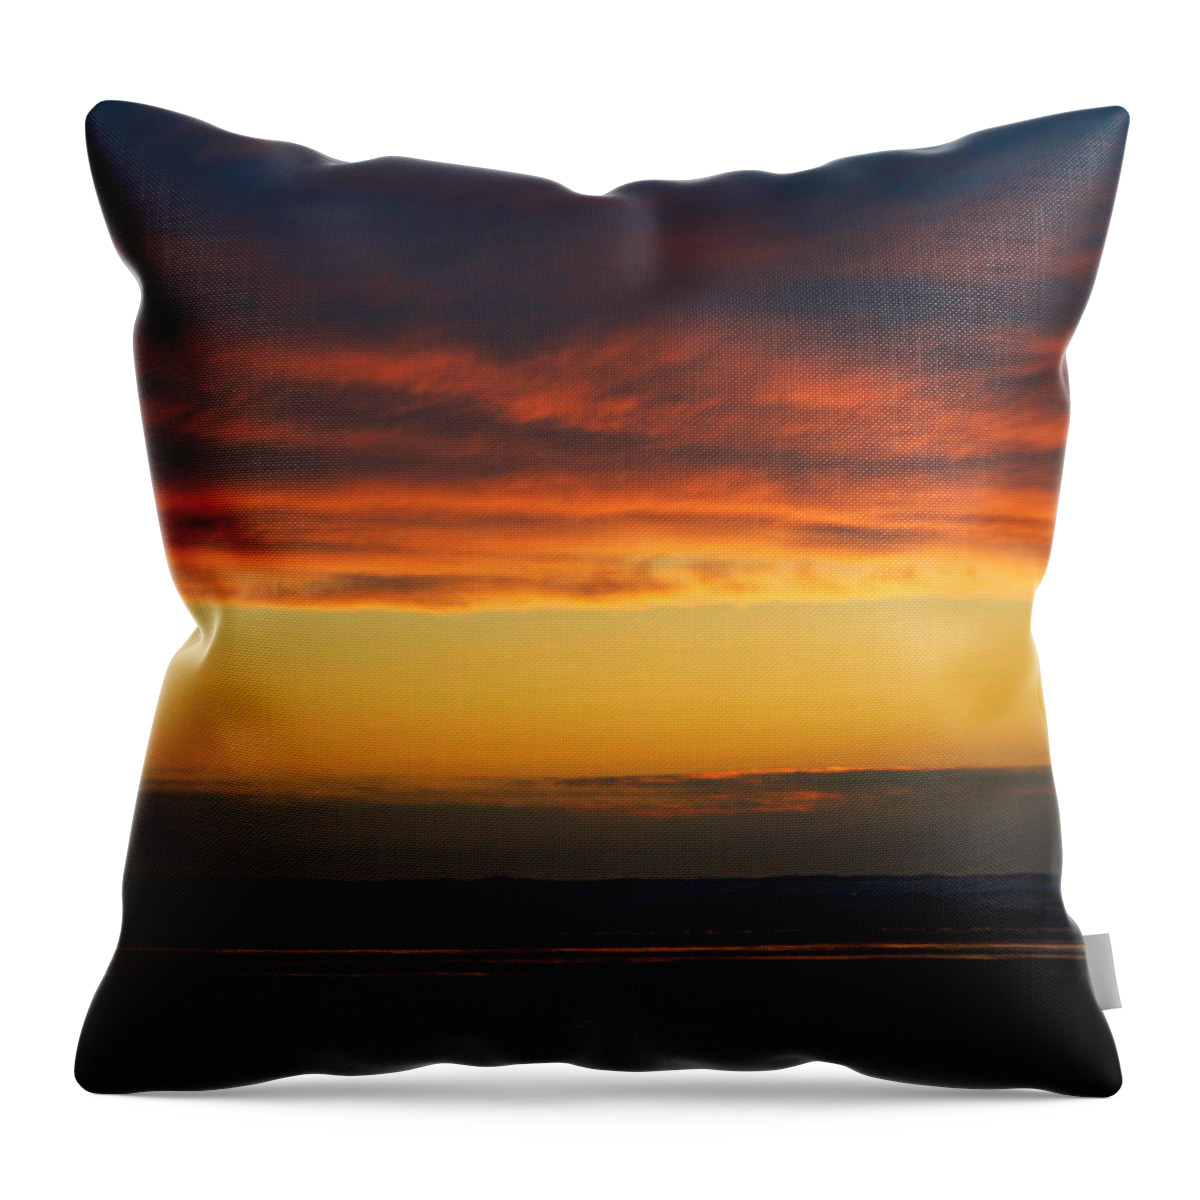 Ocean Throw Pillow featuring the photograph End Of A Perfect Day by Jeanette C Landstrom